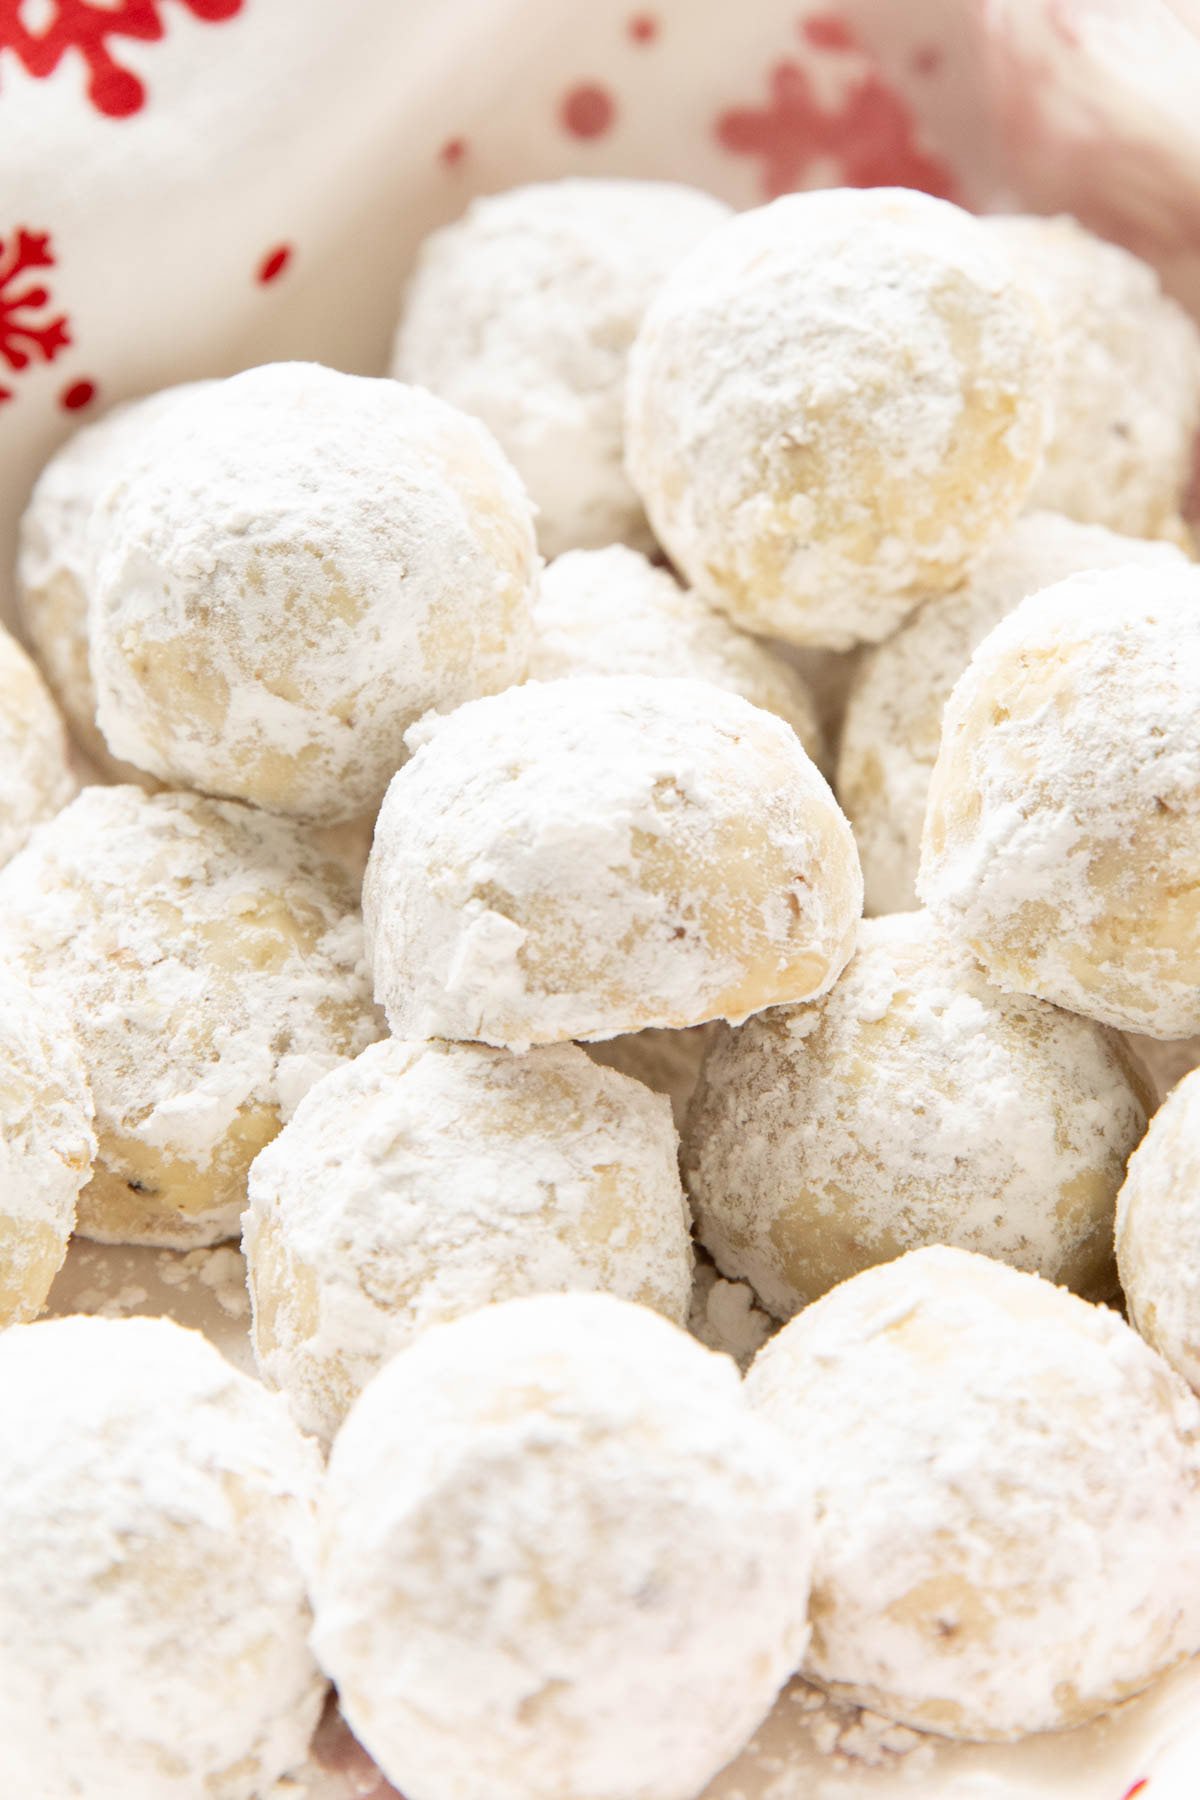 Super close up of holiday treats in a serving tray with powdered sugar and Christmas decorations